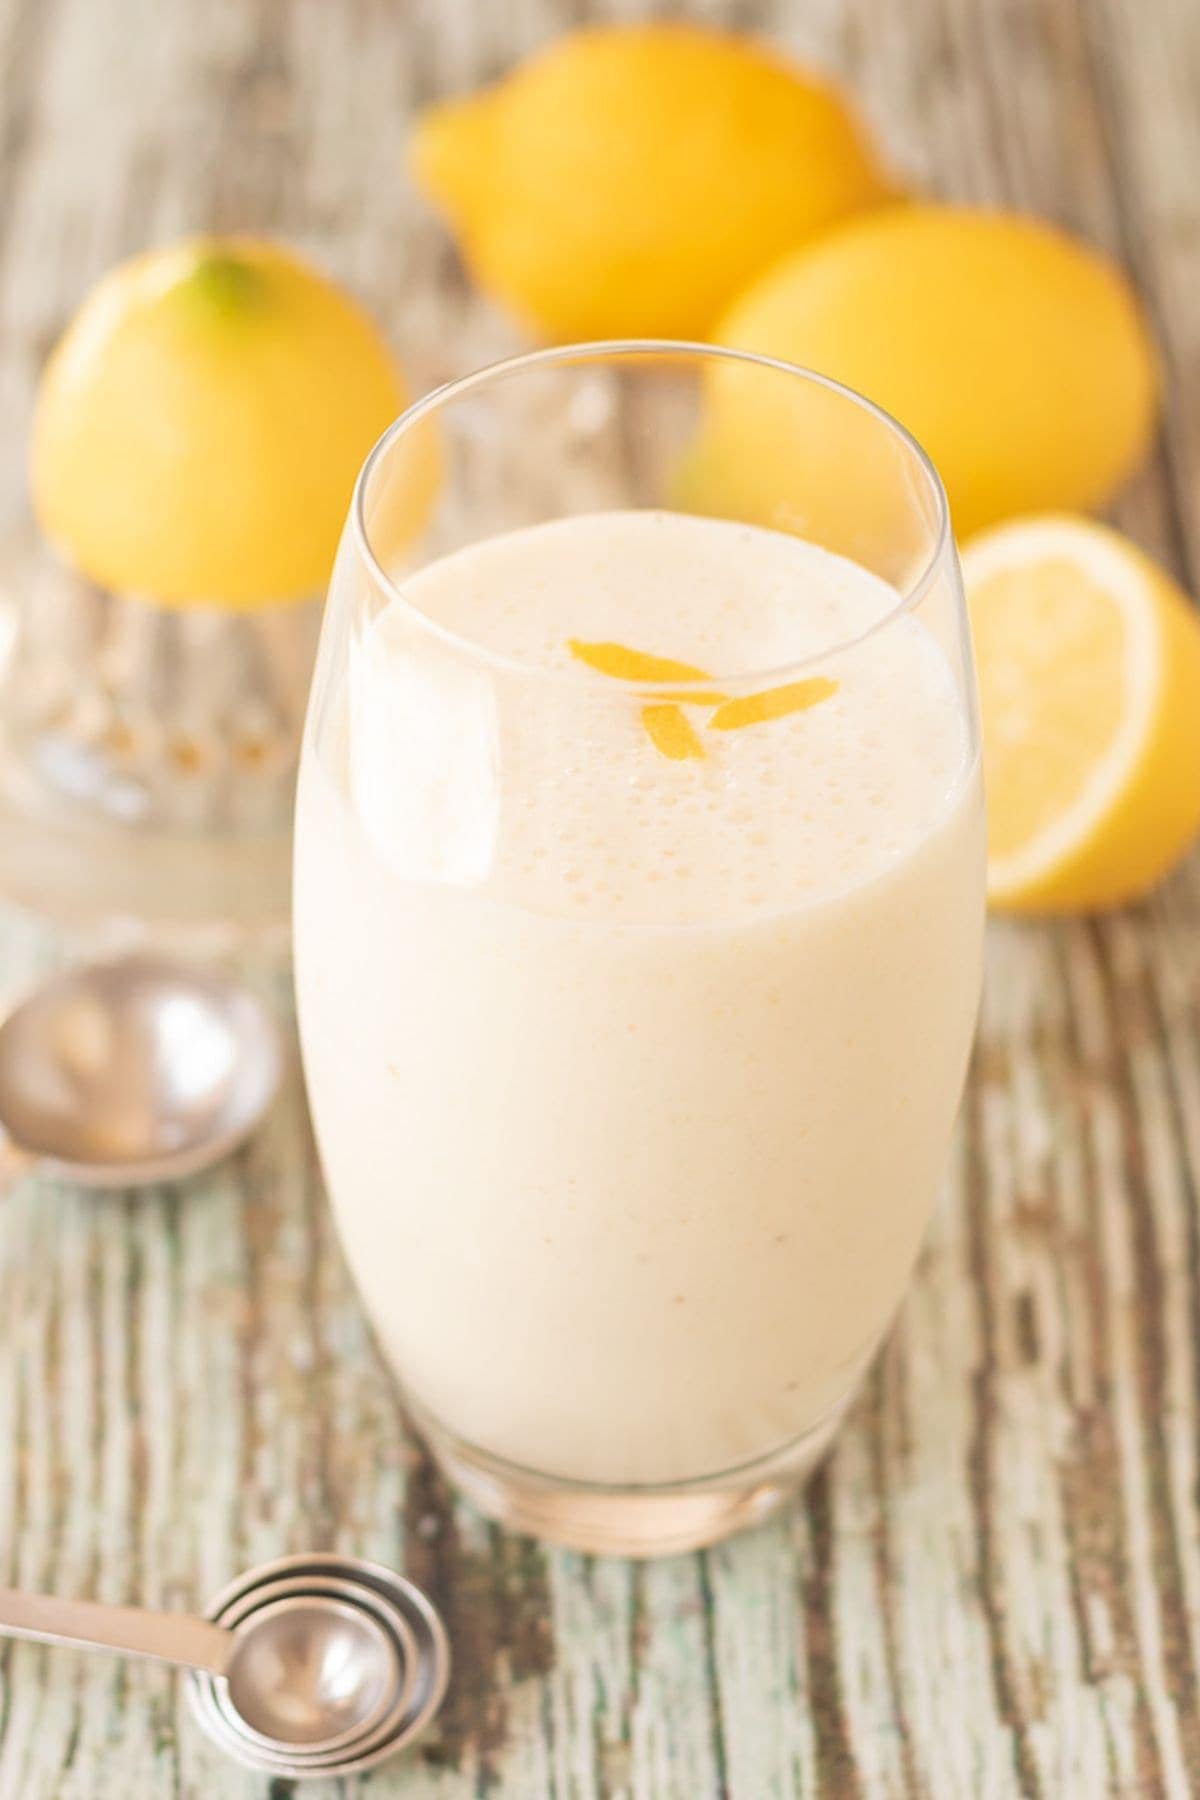 A glass of zingy lemon smoothie with measuring spoons at the base and three lemons in the background as decoration.